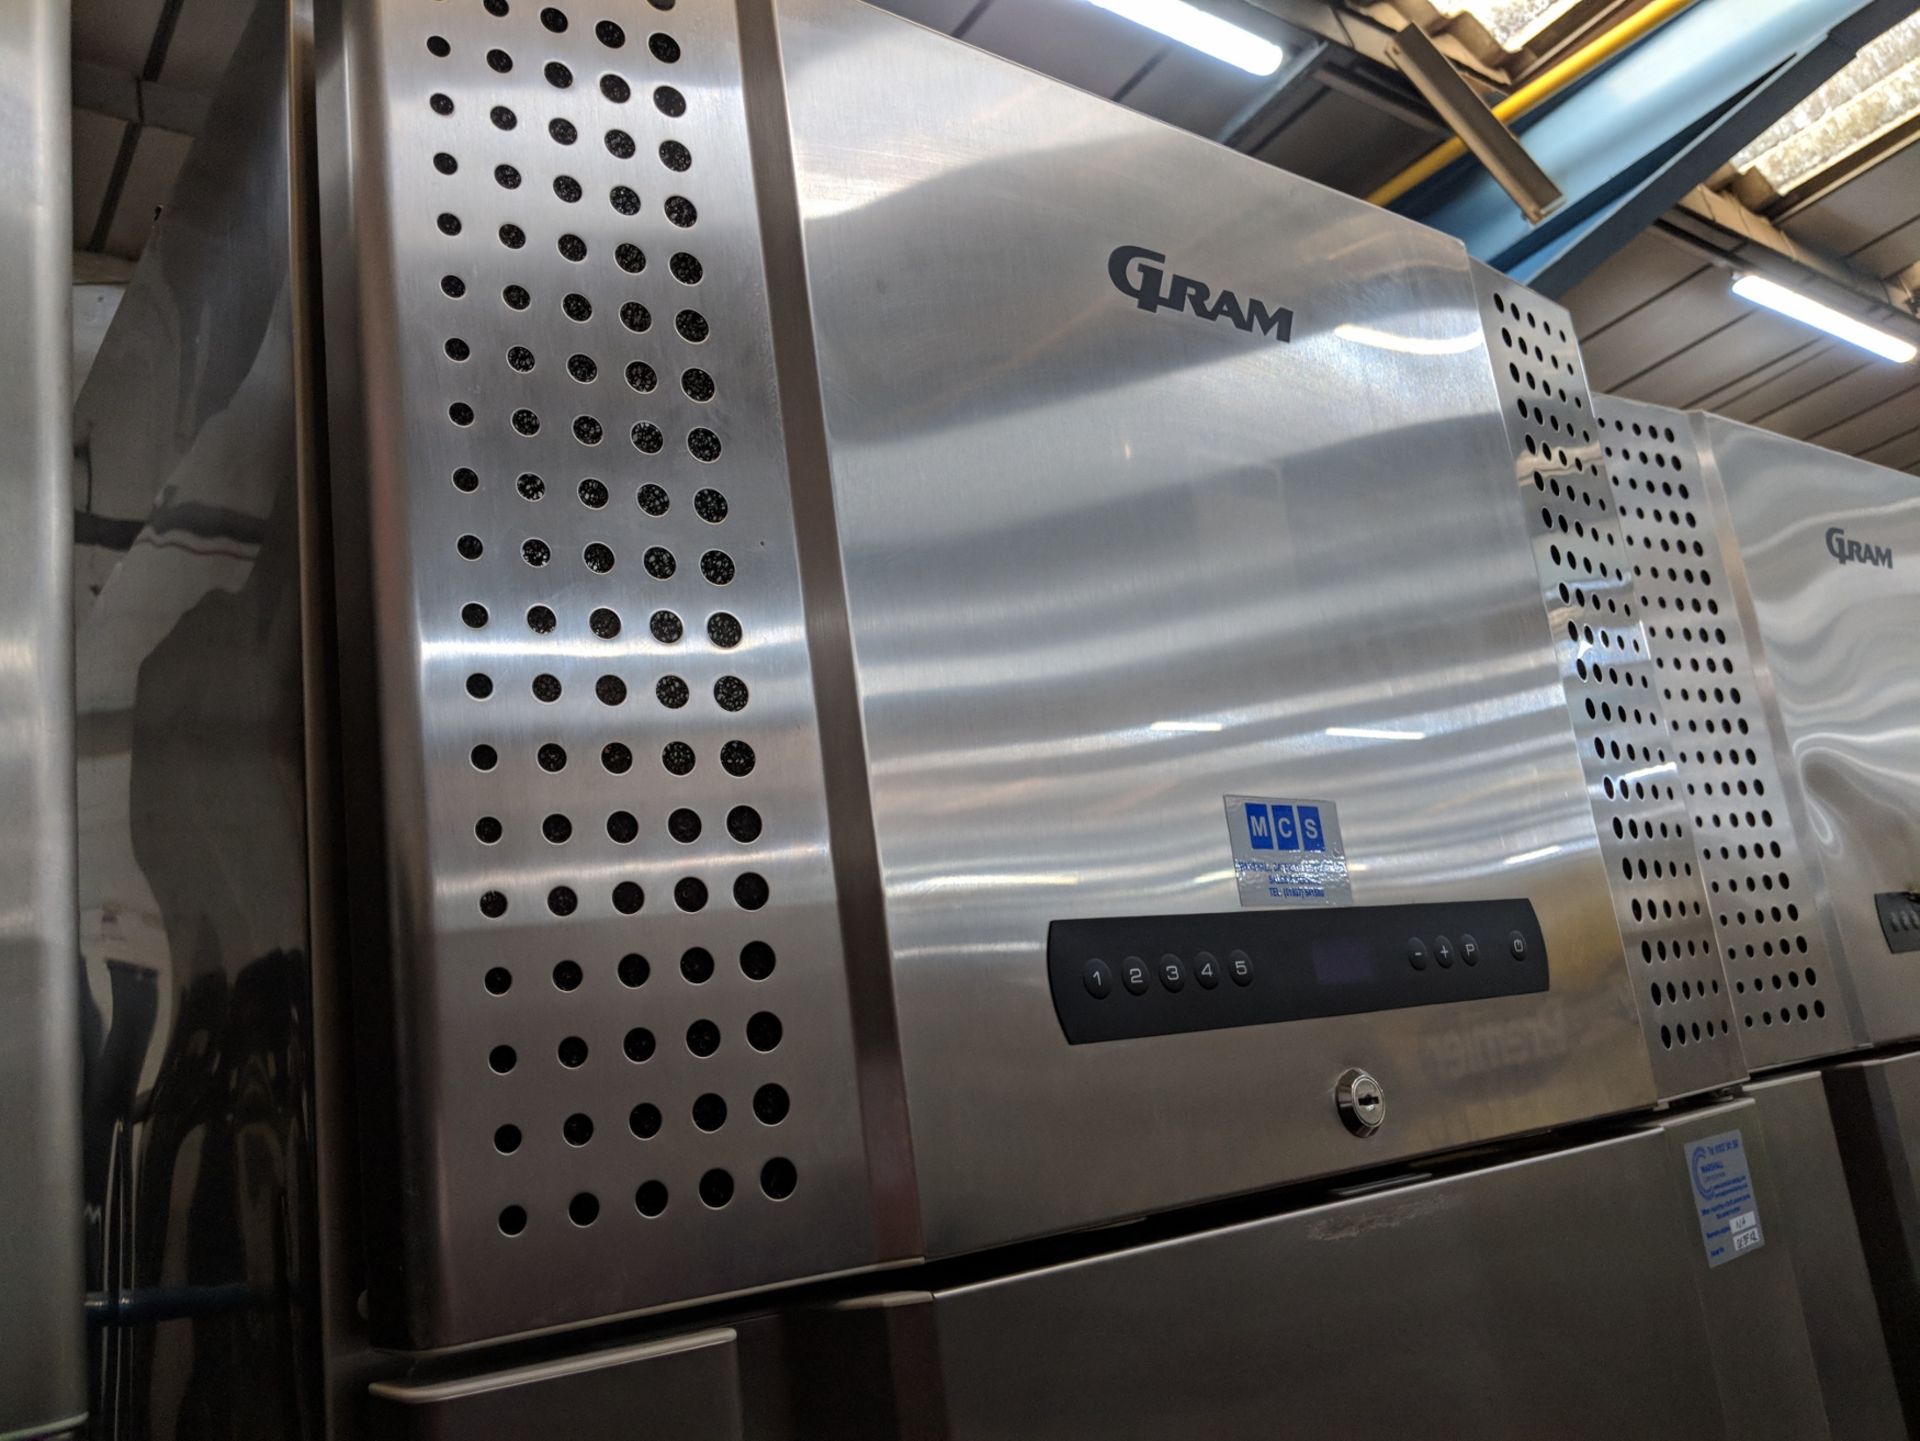 Gram stainless steel model Plus F660CXH C 5S freezer, which still has much of the original tape on - Image 3 of 4